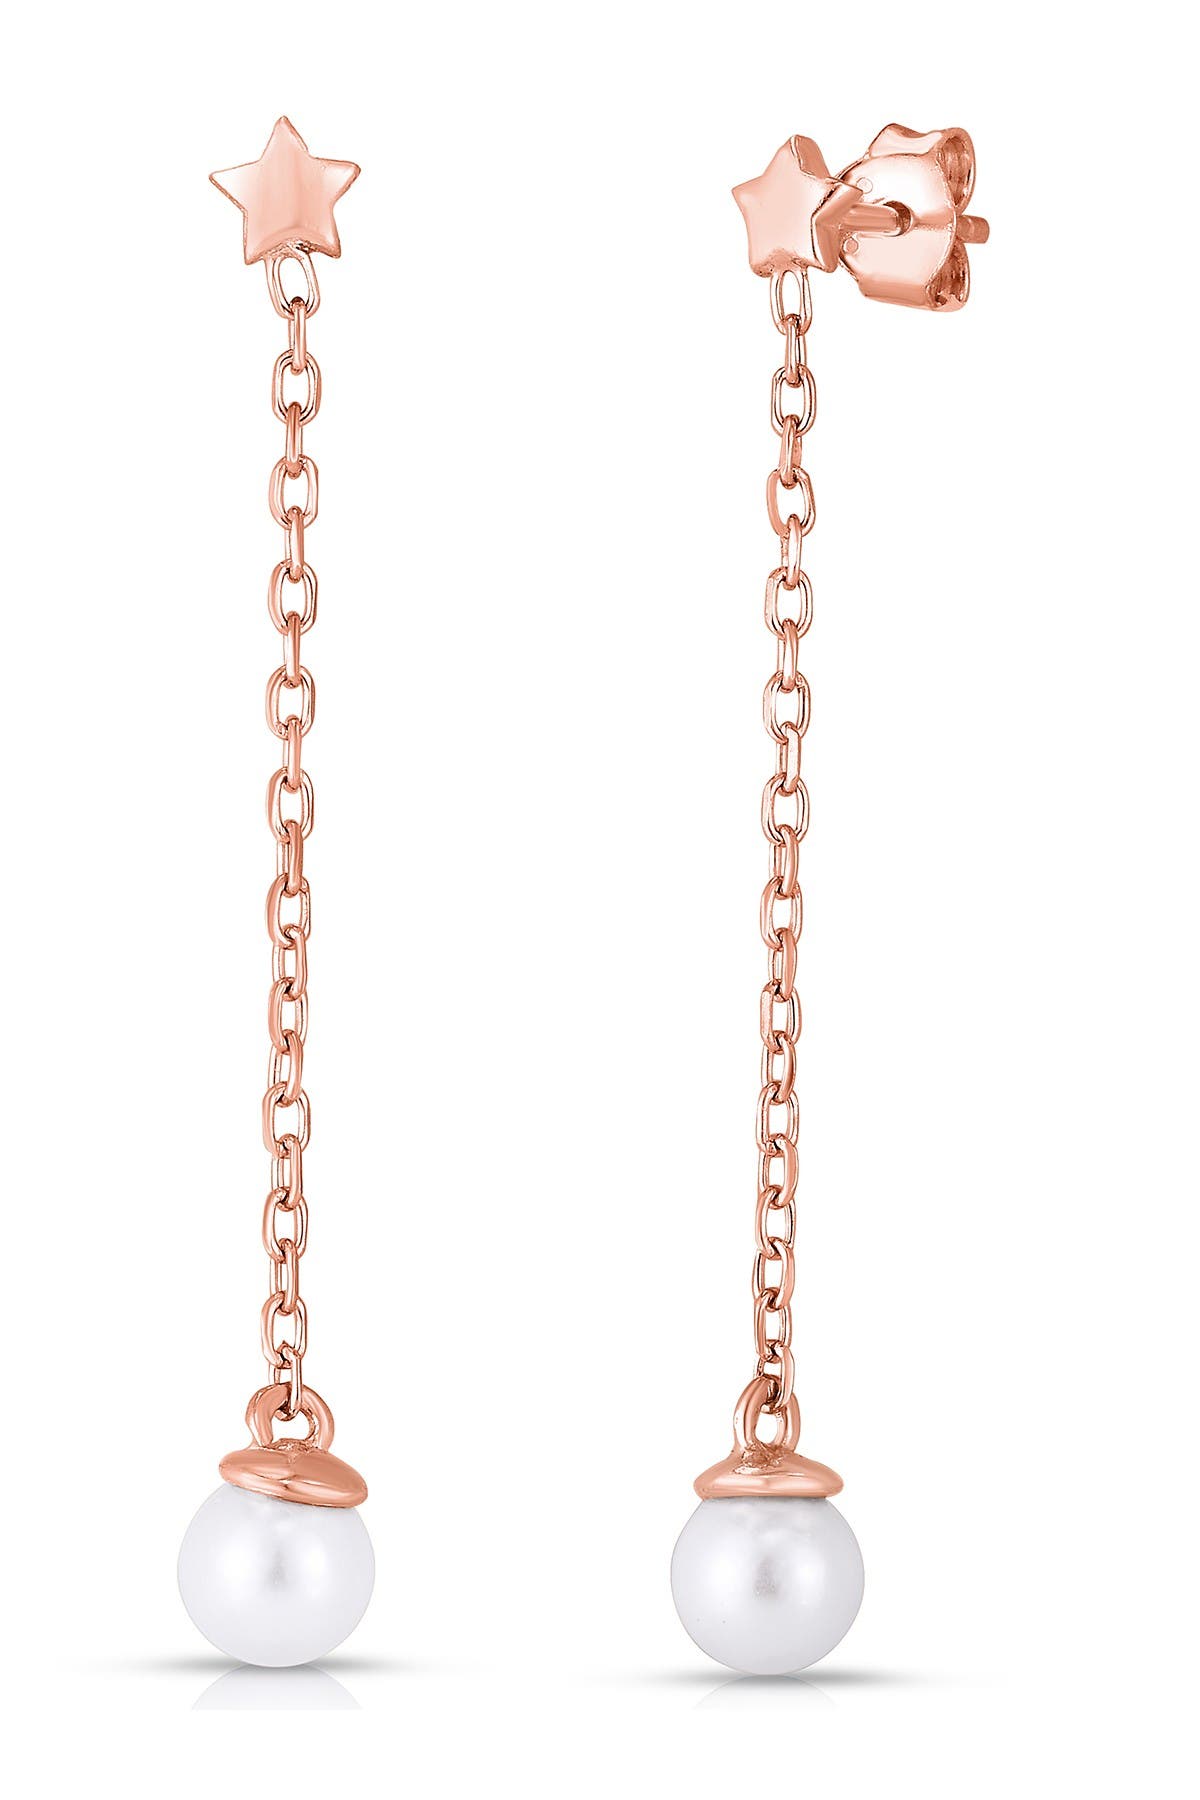 Sphera Milano 14k Rose Gold Plated Sterling Silver Star Drop Earrings With Freshwater Pearls Nordstrom Rack